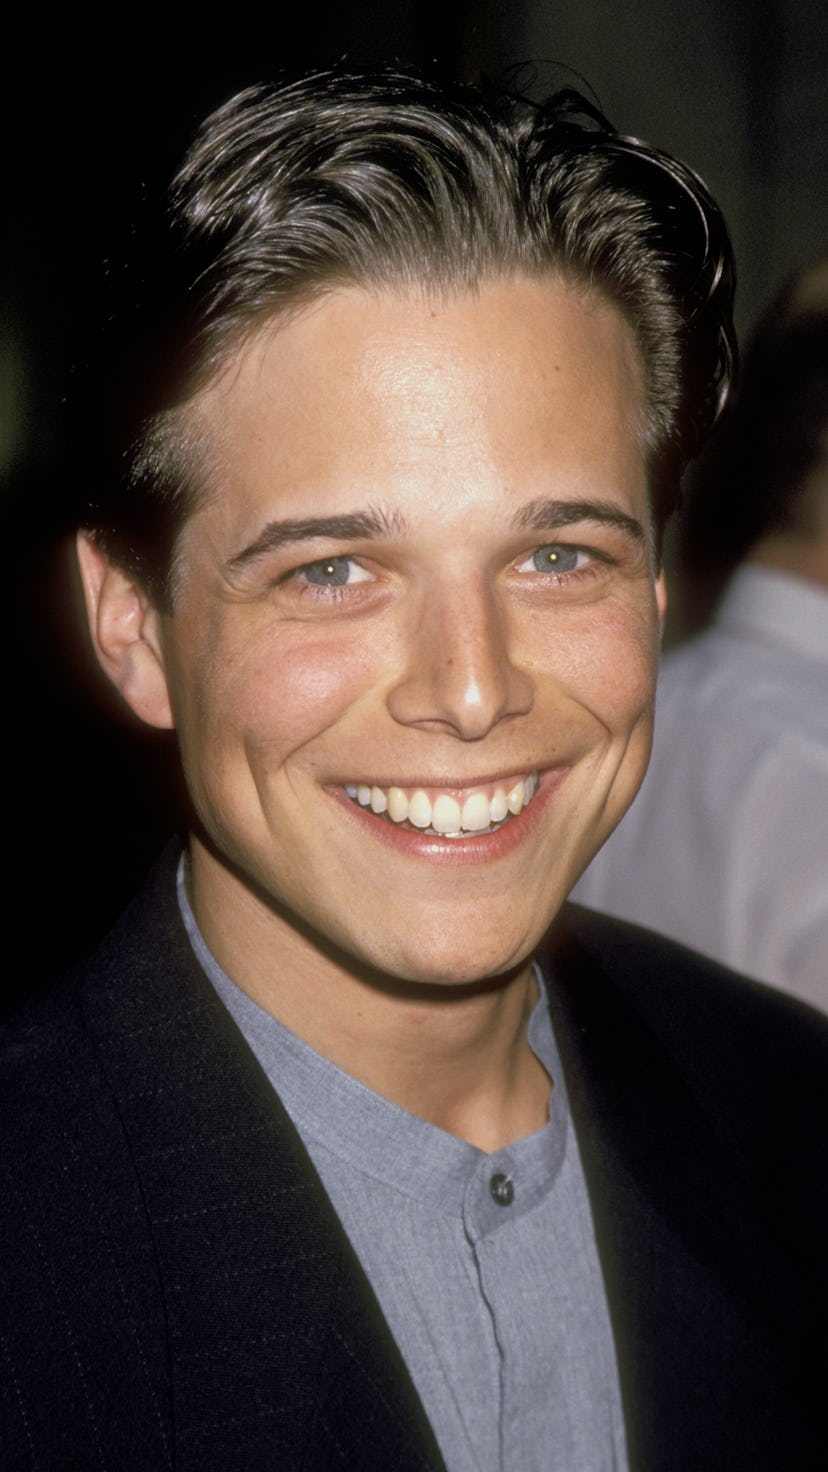 Scott Wolf's portrayal of Bailey made the name popular for boys.